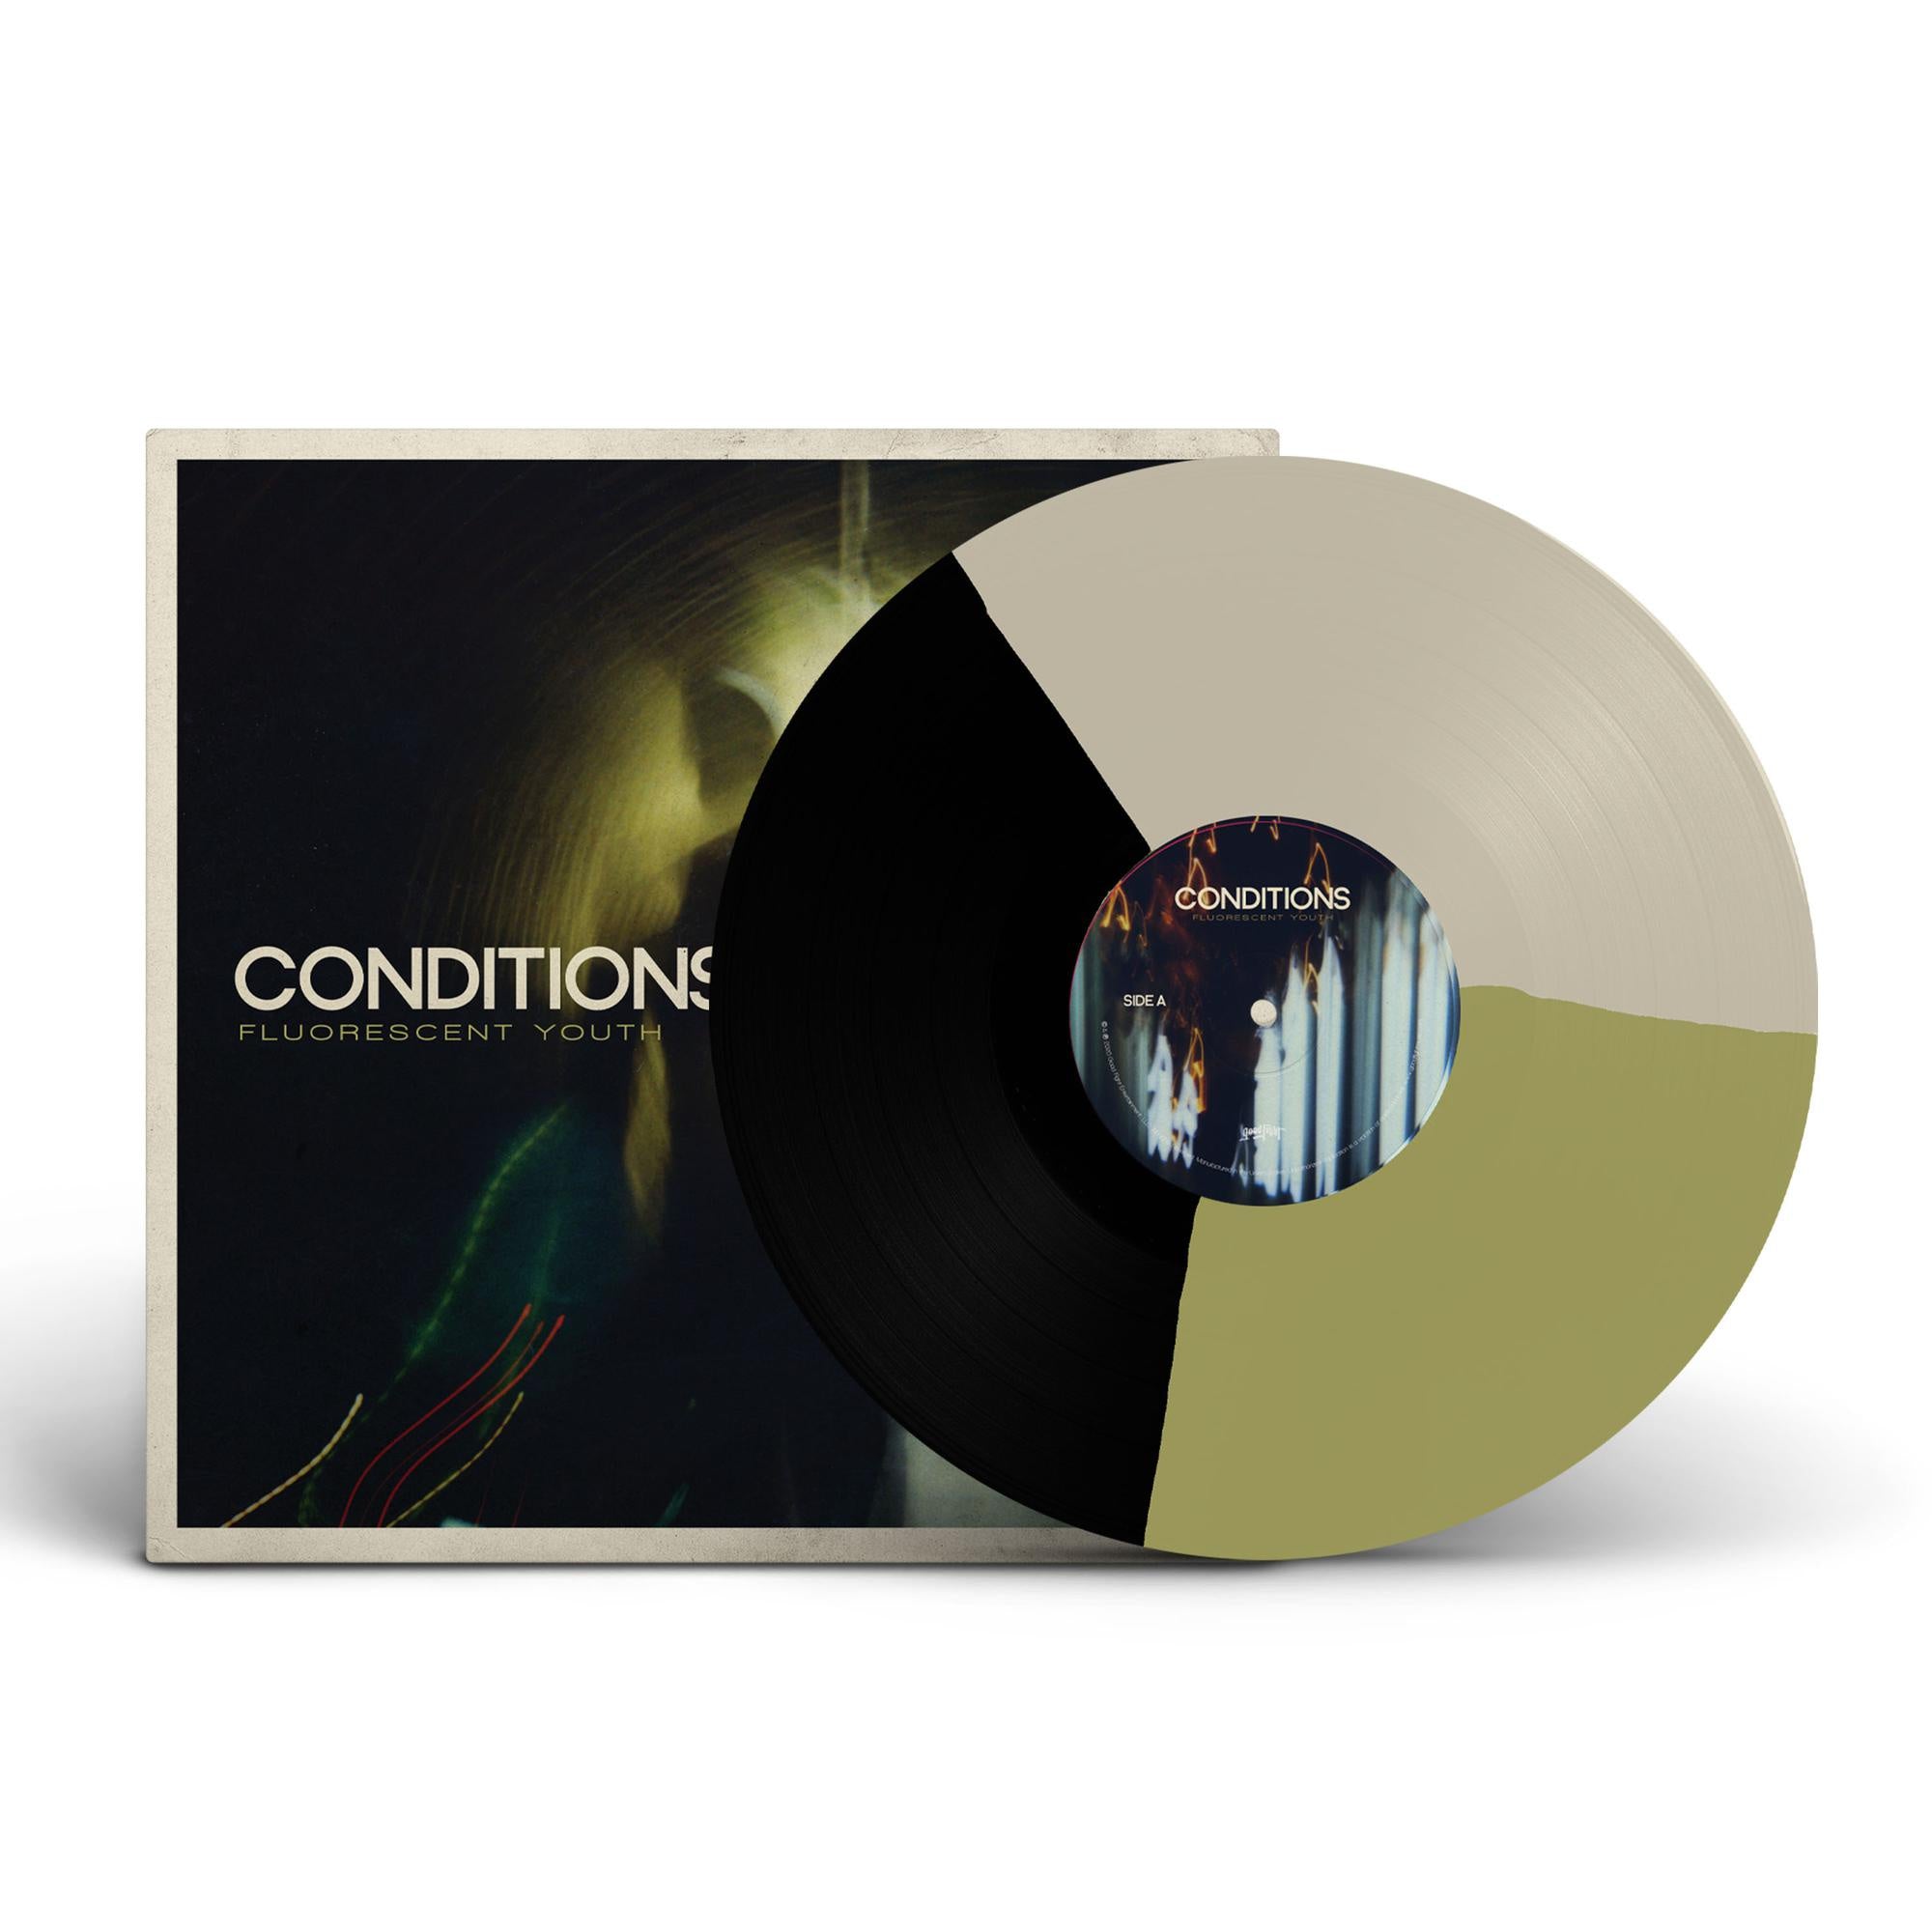 Conditions – Fluorescent Youth (10 Year Anniversary Edition) - New LP Record 2020 Good Fight Limited Tri-Color Vinyl - Alternative Rock